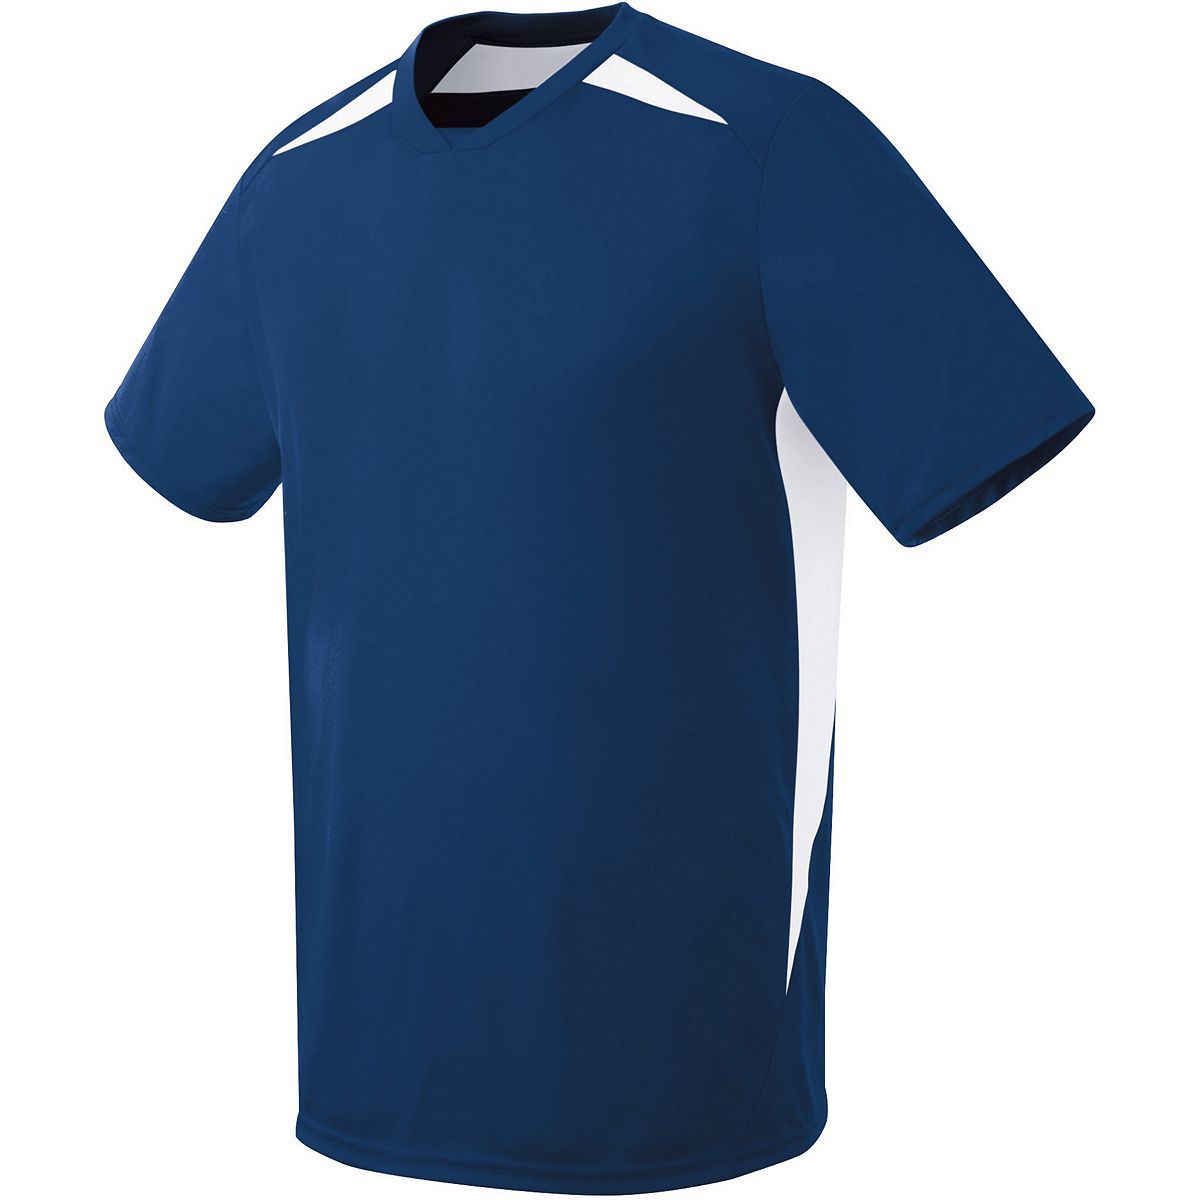 High 5 Adult Hawk Jersey in Navy/White  -Part of the Adult, Adult-Jersey, High5-Products, Soccer, Shirts, All-Sports-1 product lines at KanaleyCreations.com